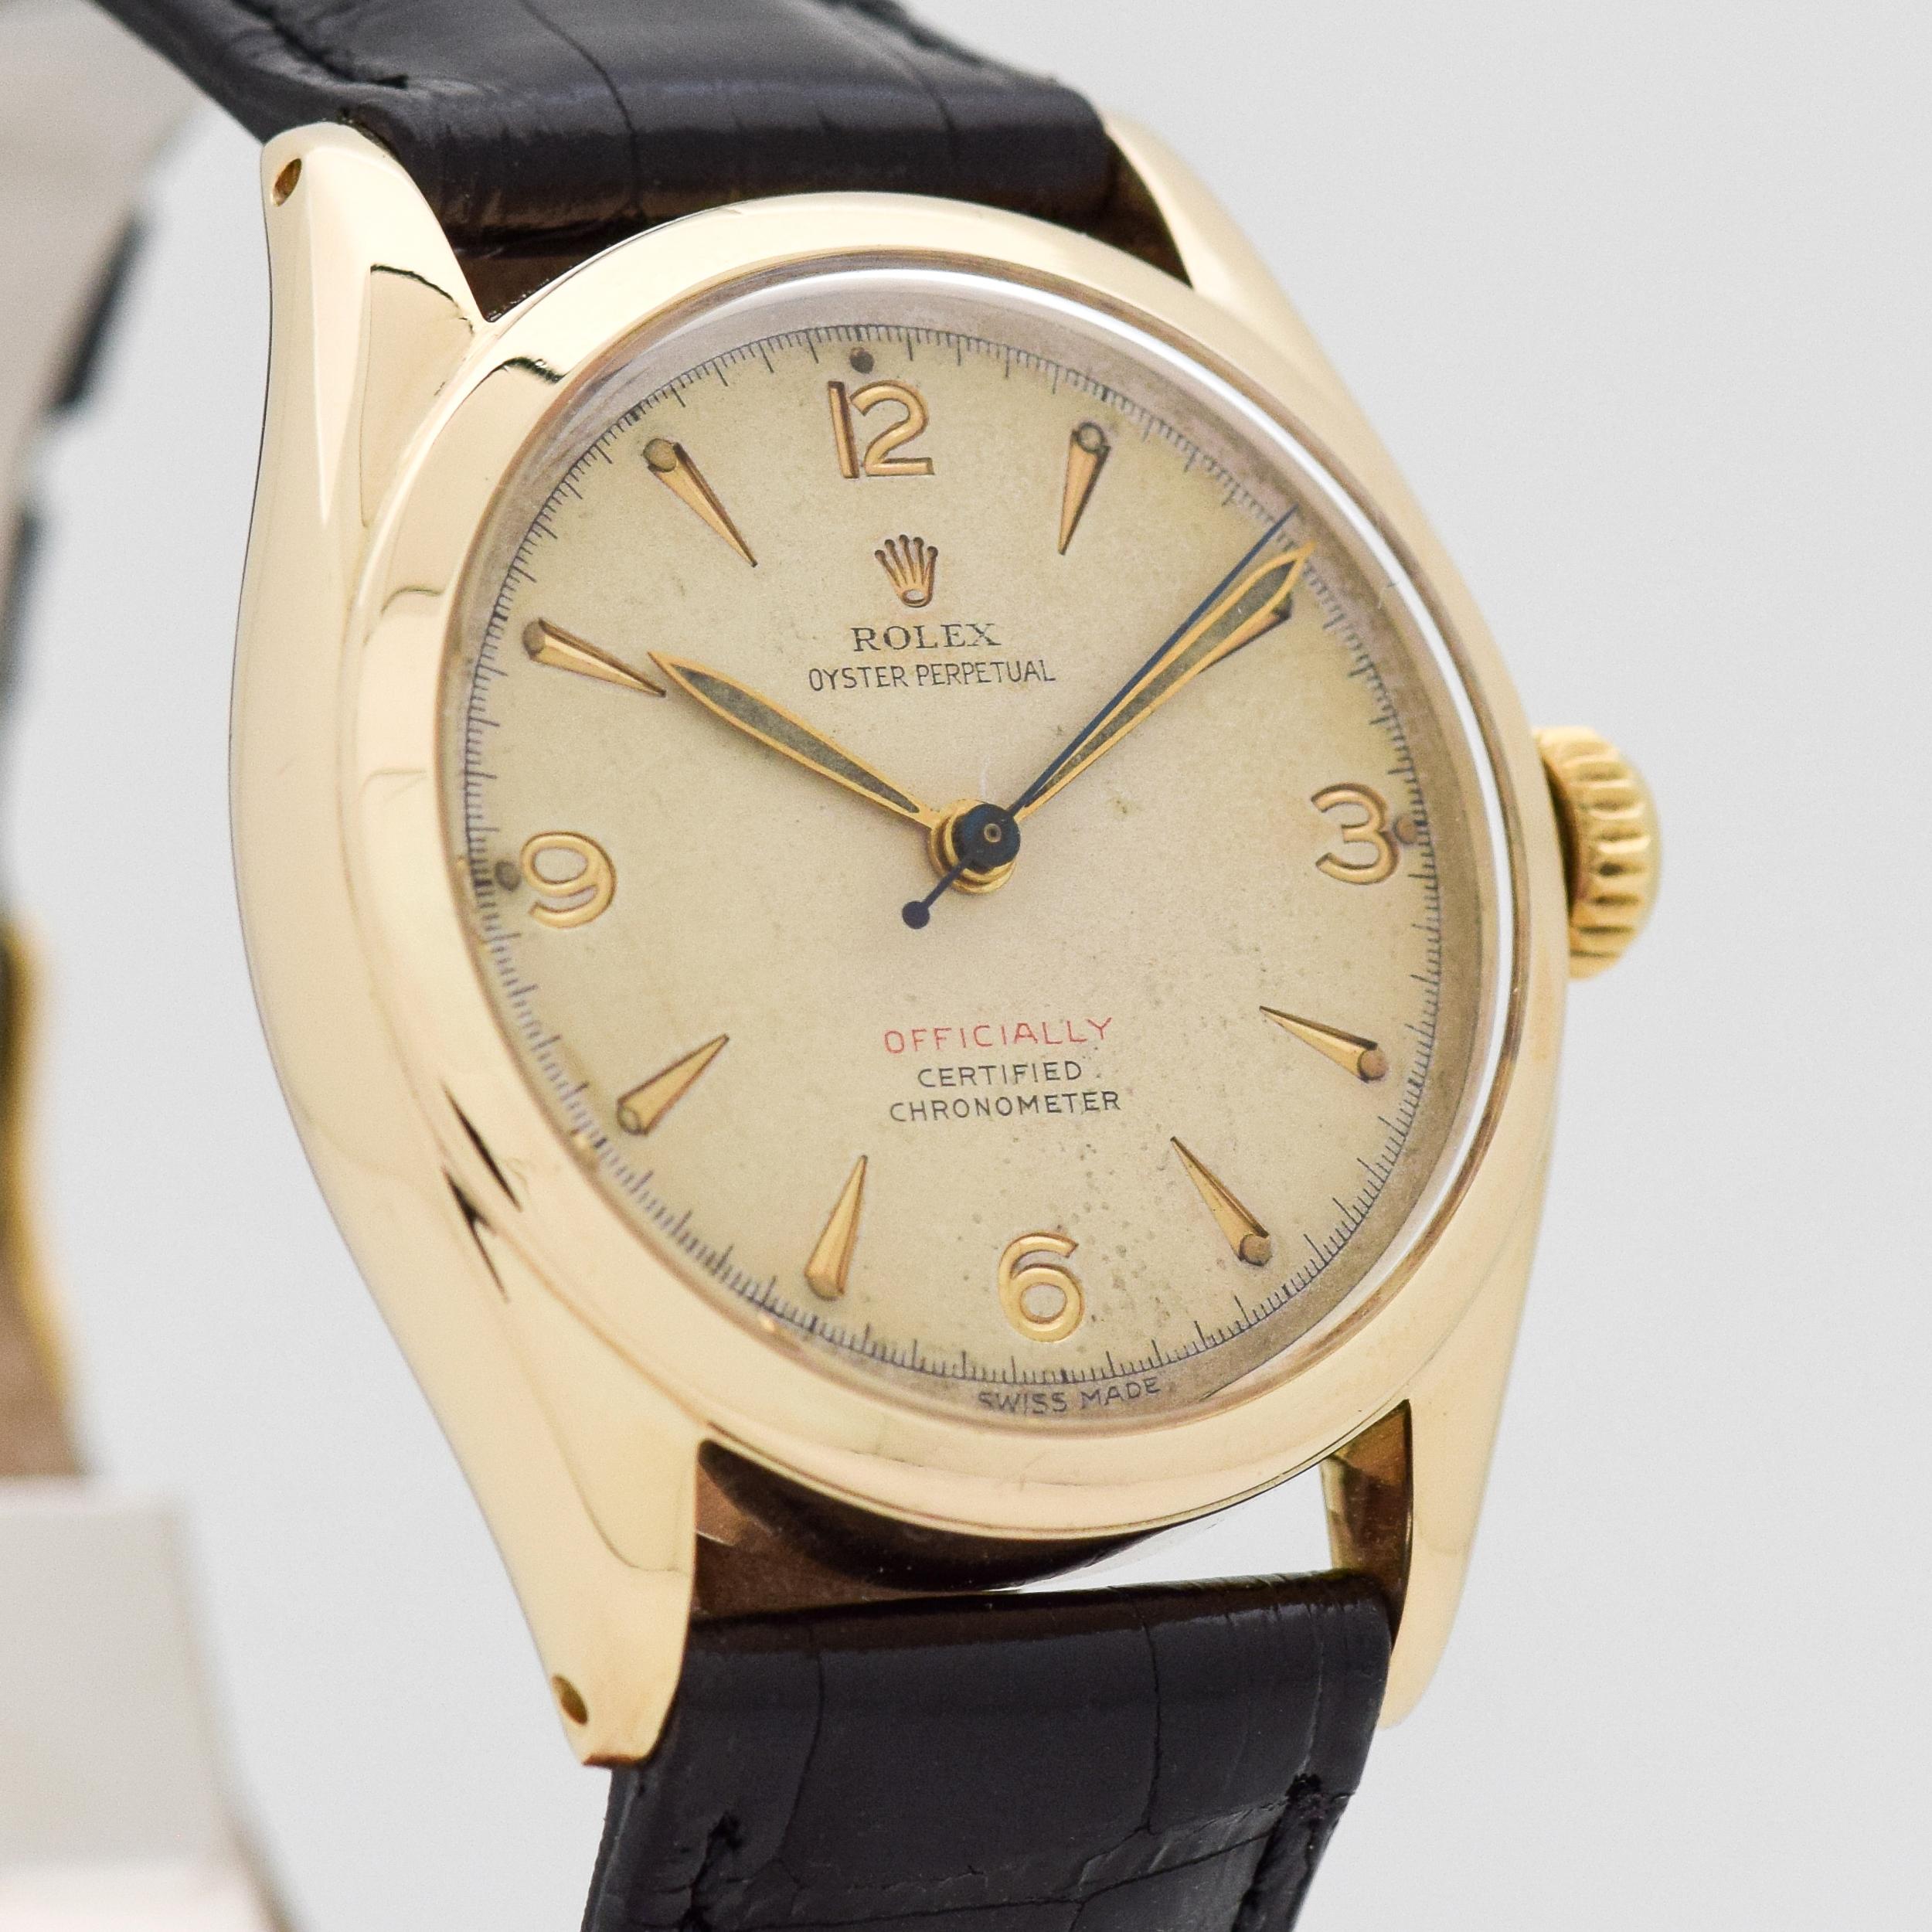 1951 Vintage Rolex Oyster Perpetual Big Semi Bubbleback Ref. 6084 14k Yellow Gold watch with Original Silver Dial with Recessed Gold Color Arabic 3, 6, 9, and 12 with Elongated Beveled Arrow Markers. 34mm x 39mm lug to lug (1.34 in. x 1.54 in.) 20